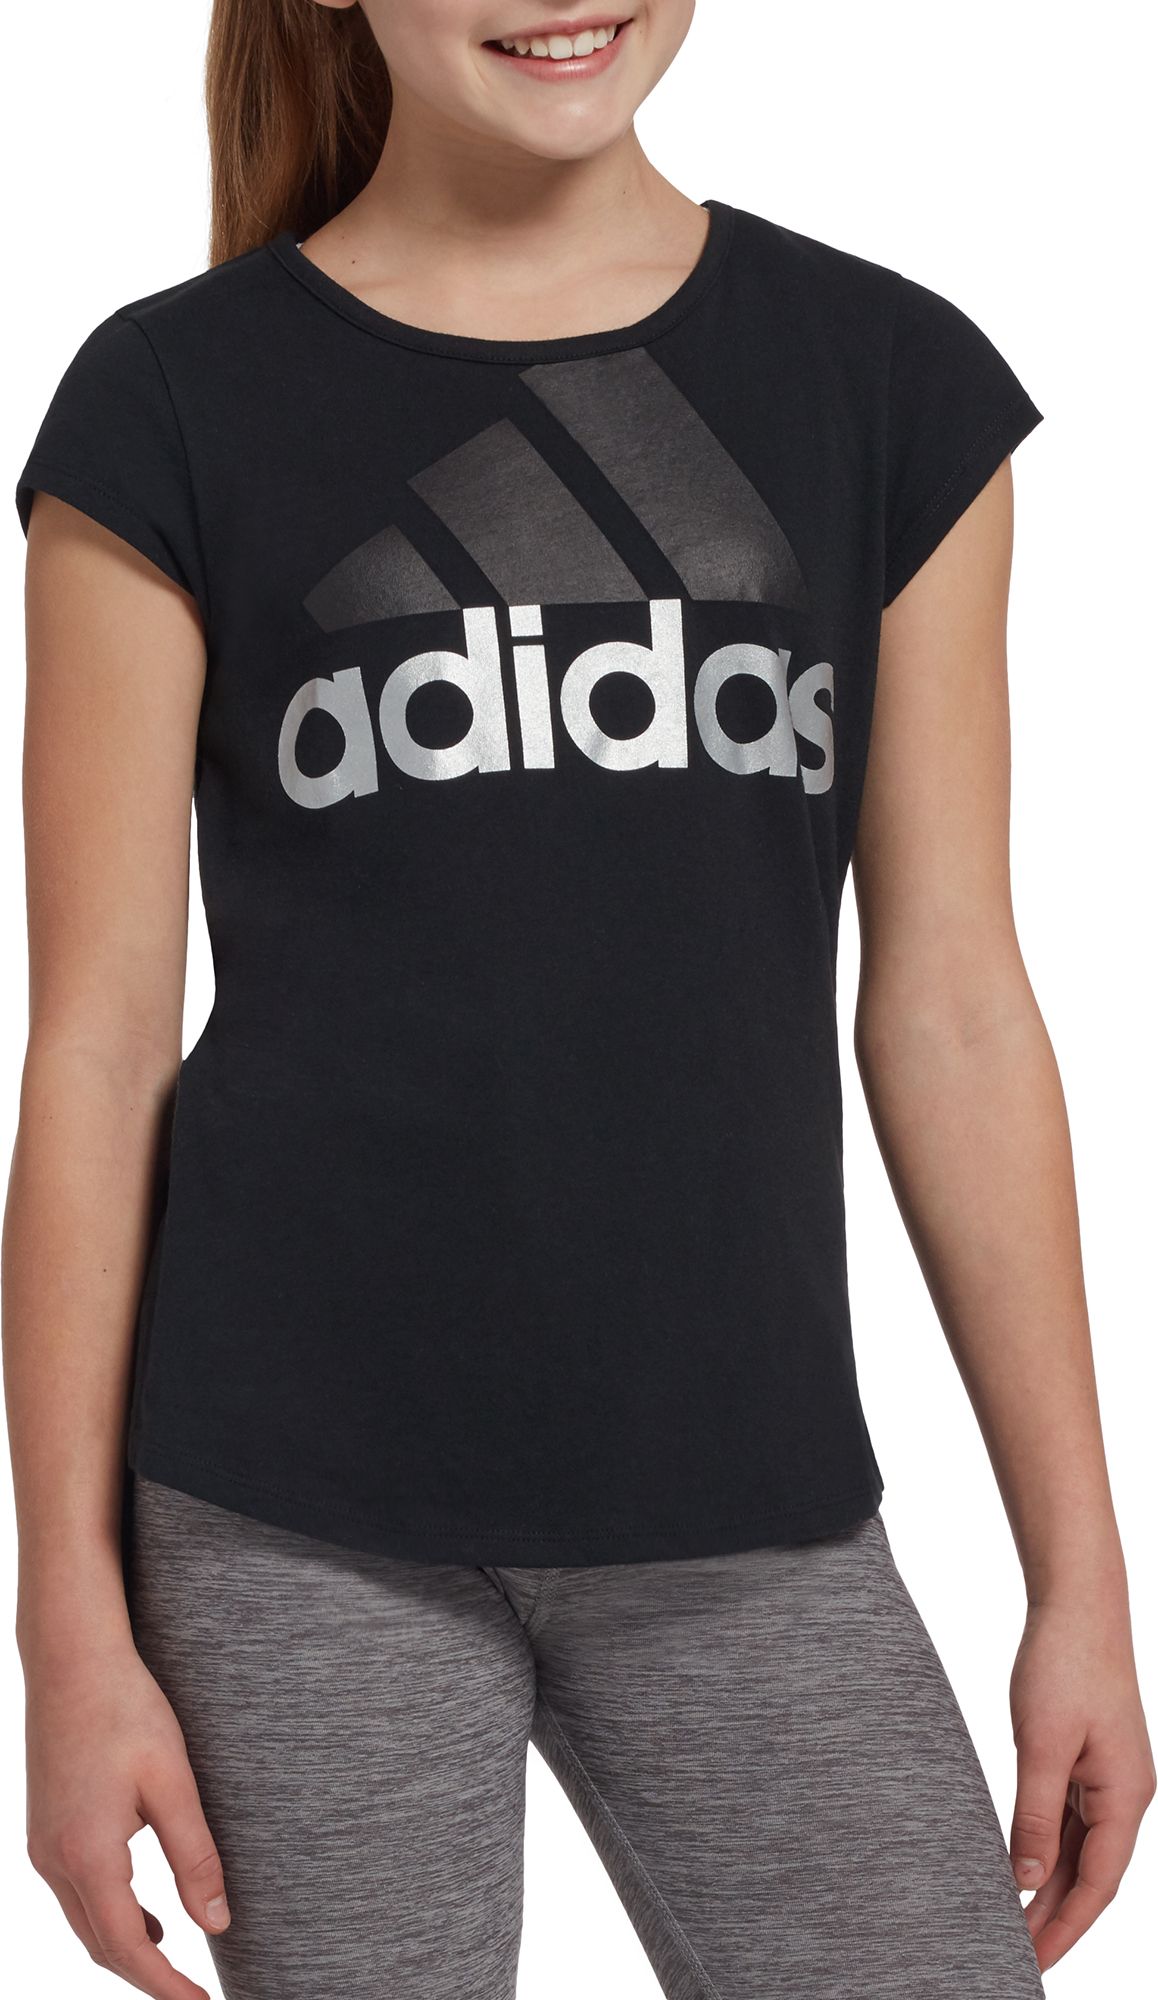 adidas t shirts for girls